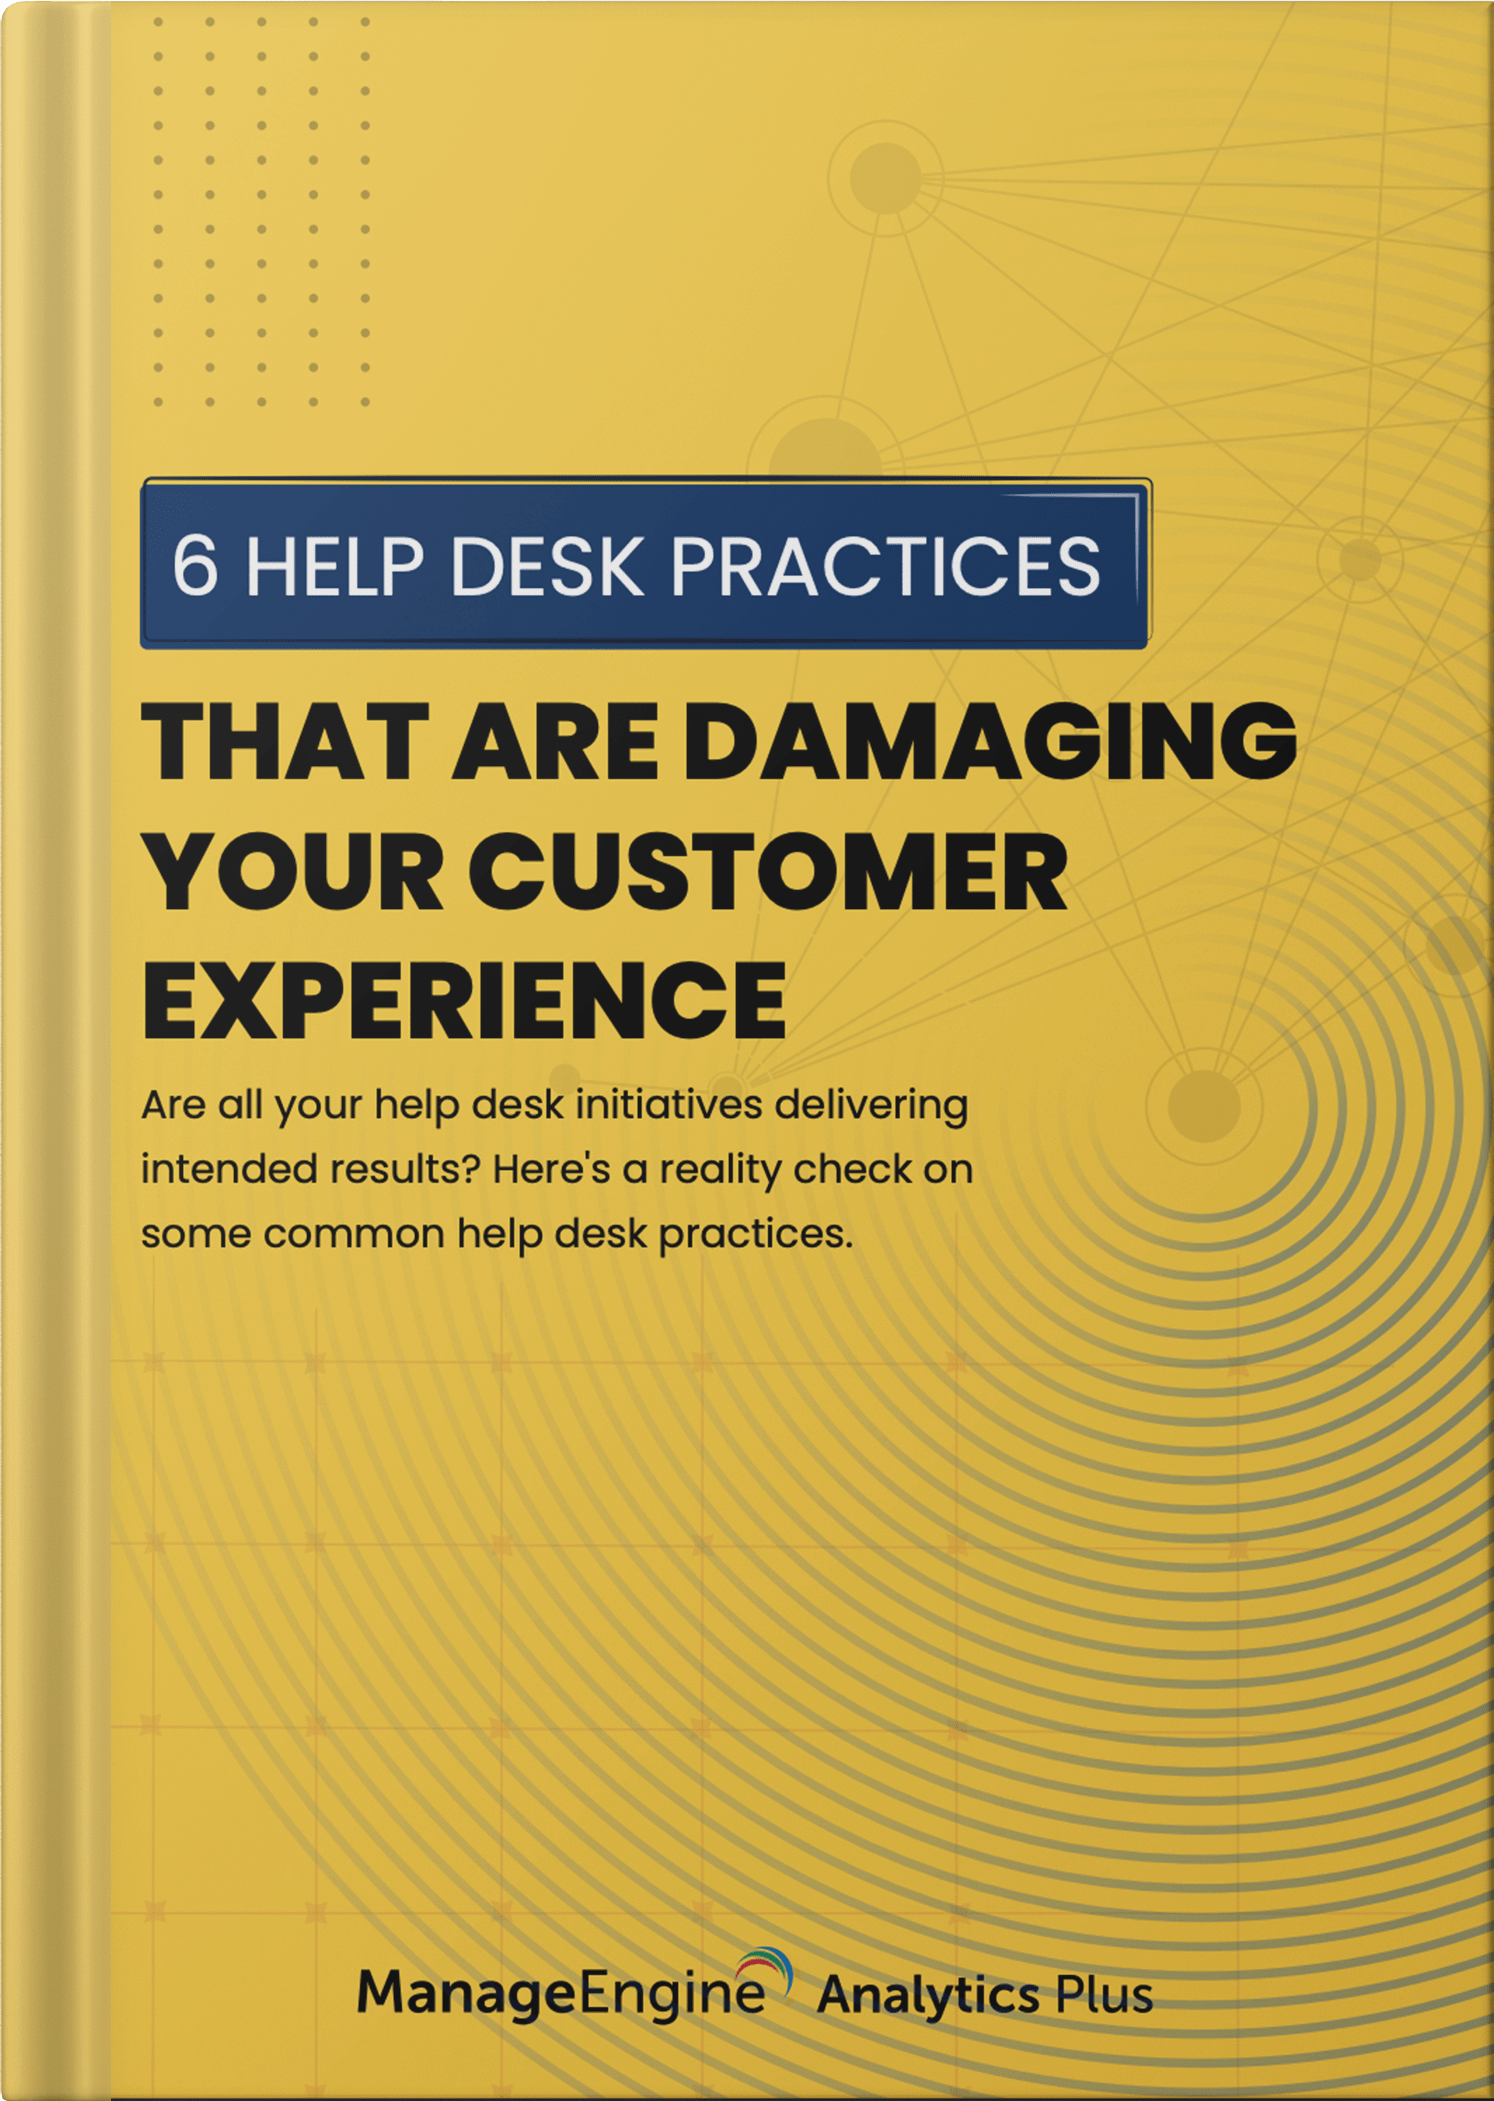 6 help desk practices that are damaging your customer experience